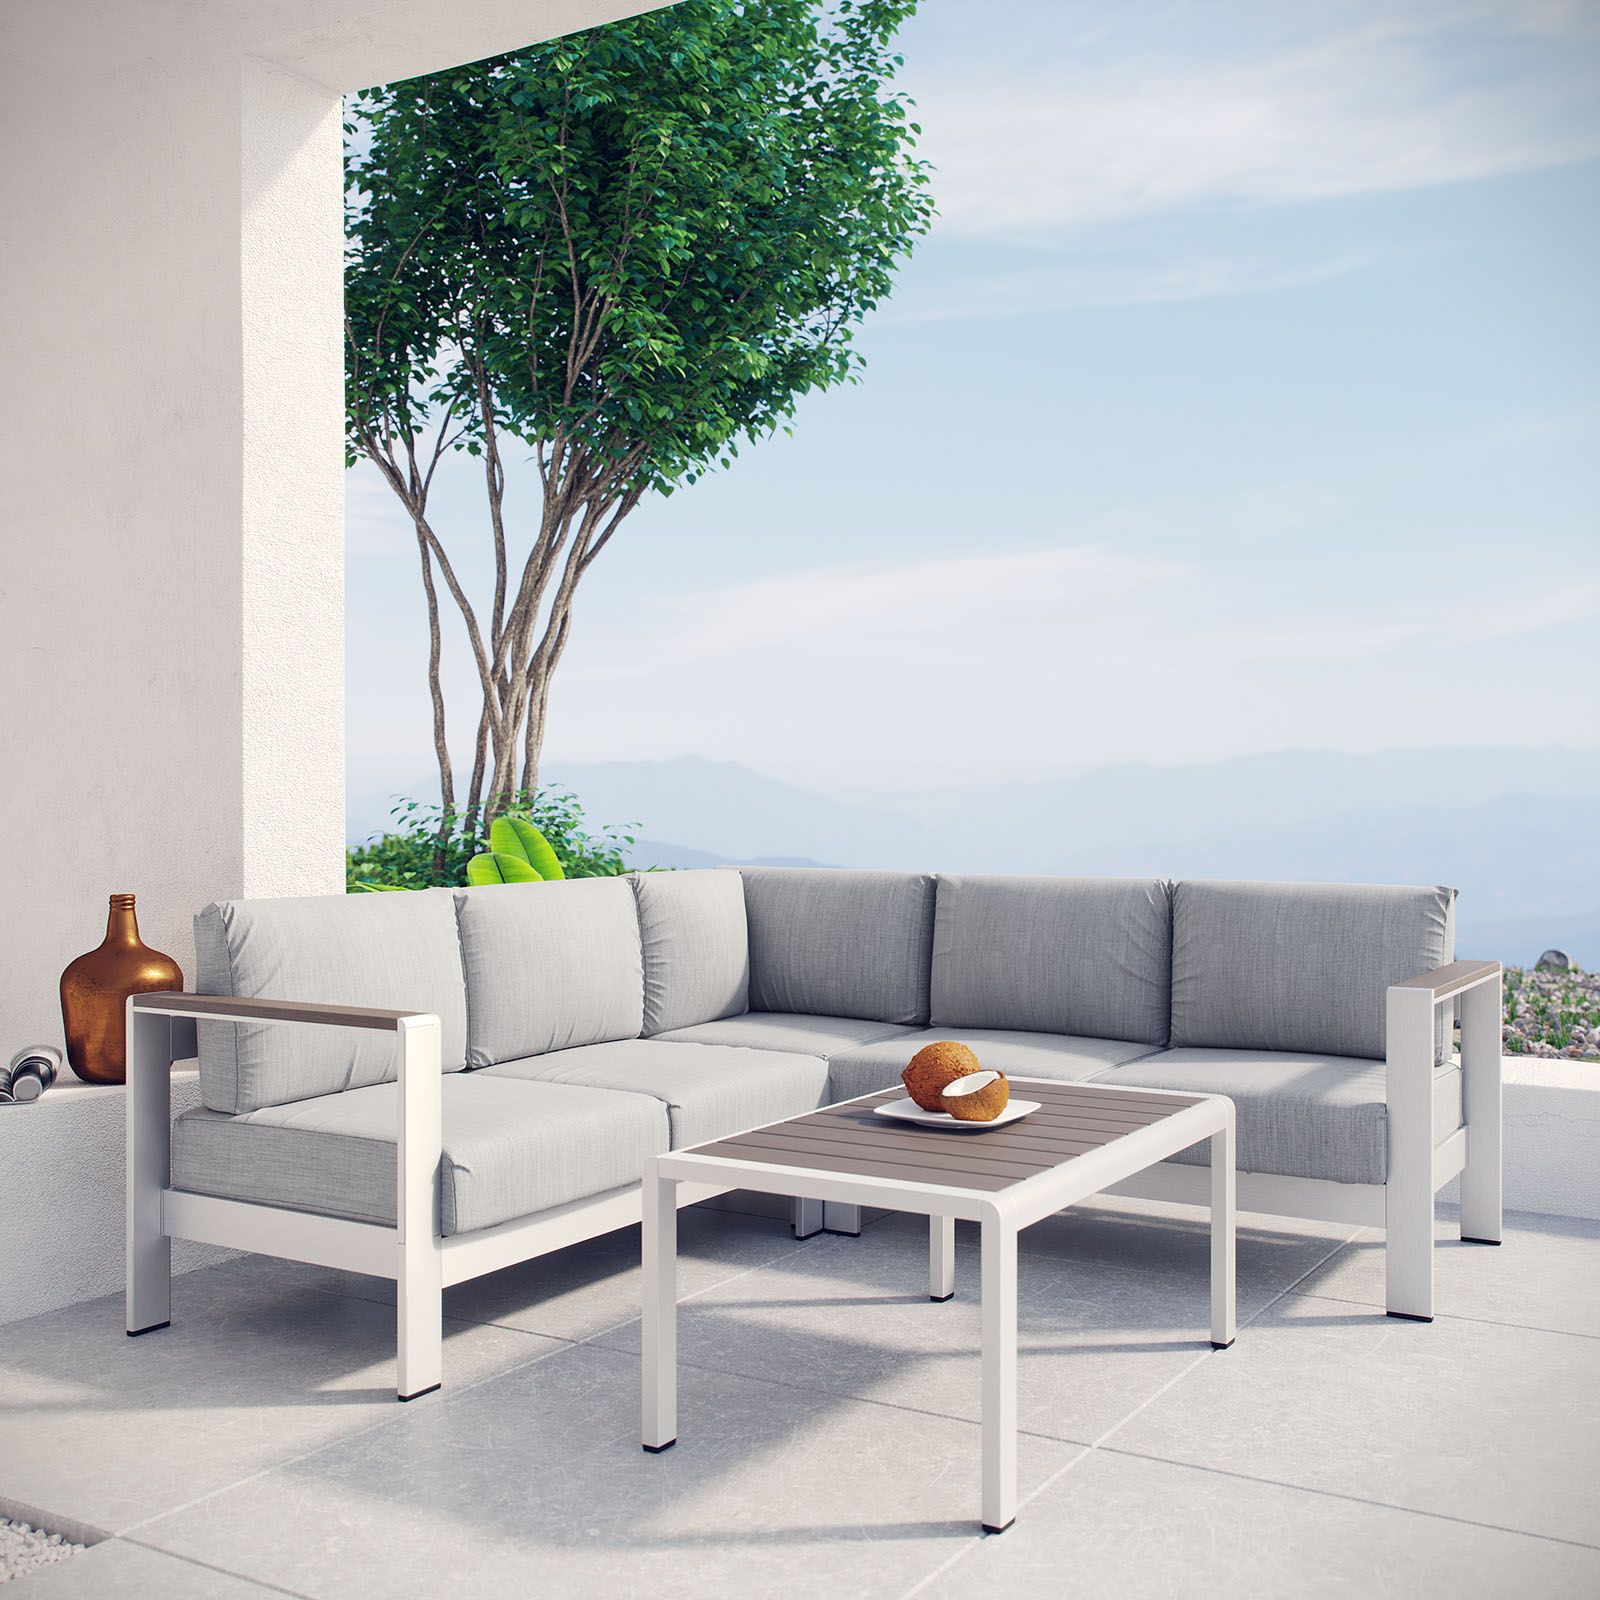 Latest Shore 4 Piece Outdoor Patio Aluminum Sectional Sofa Set Silver Gray Inside 4 Piece Outdoor Sectional Patio Sets (View 3 of 15)